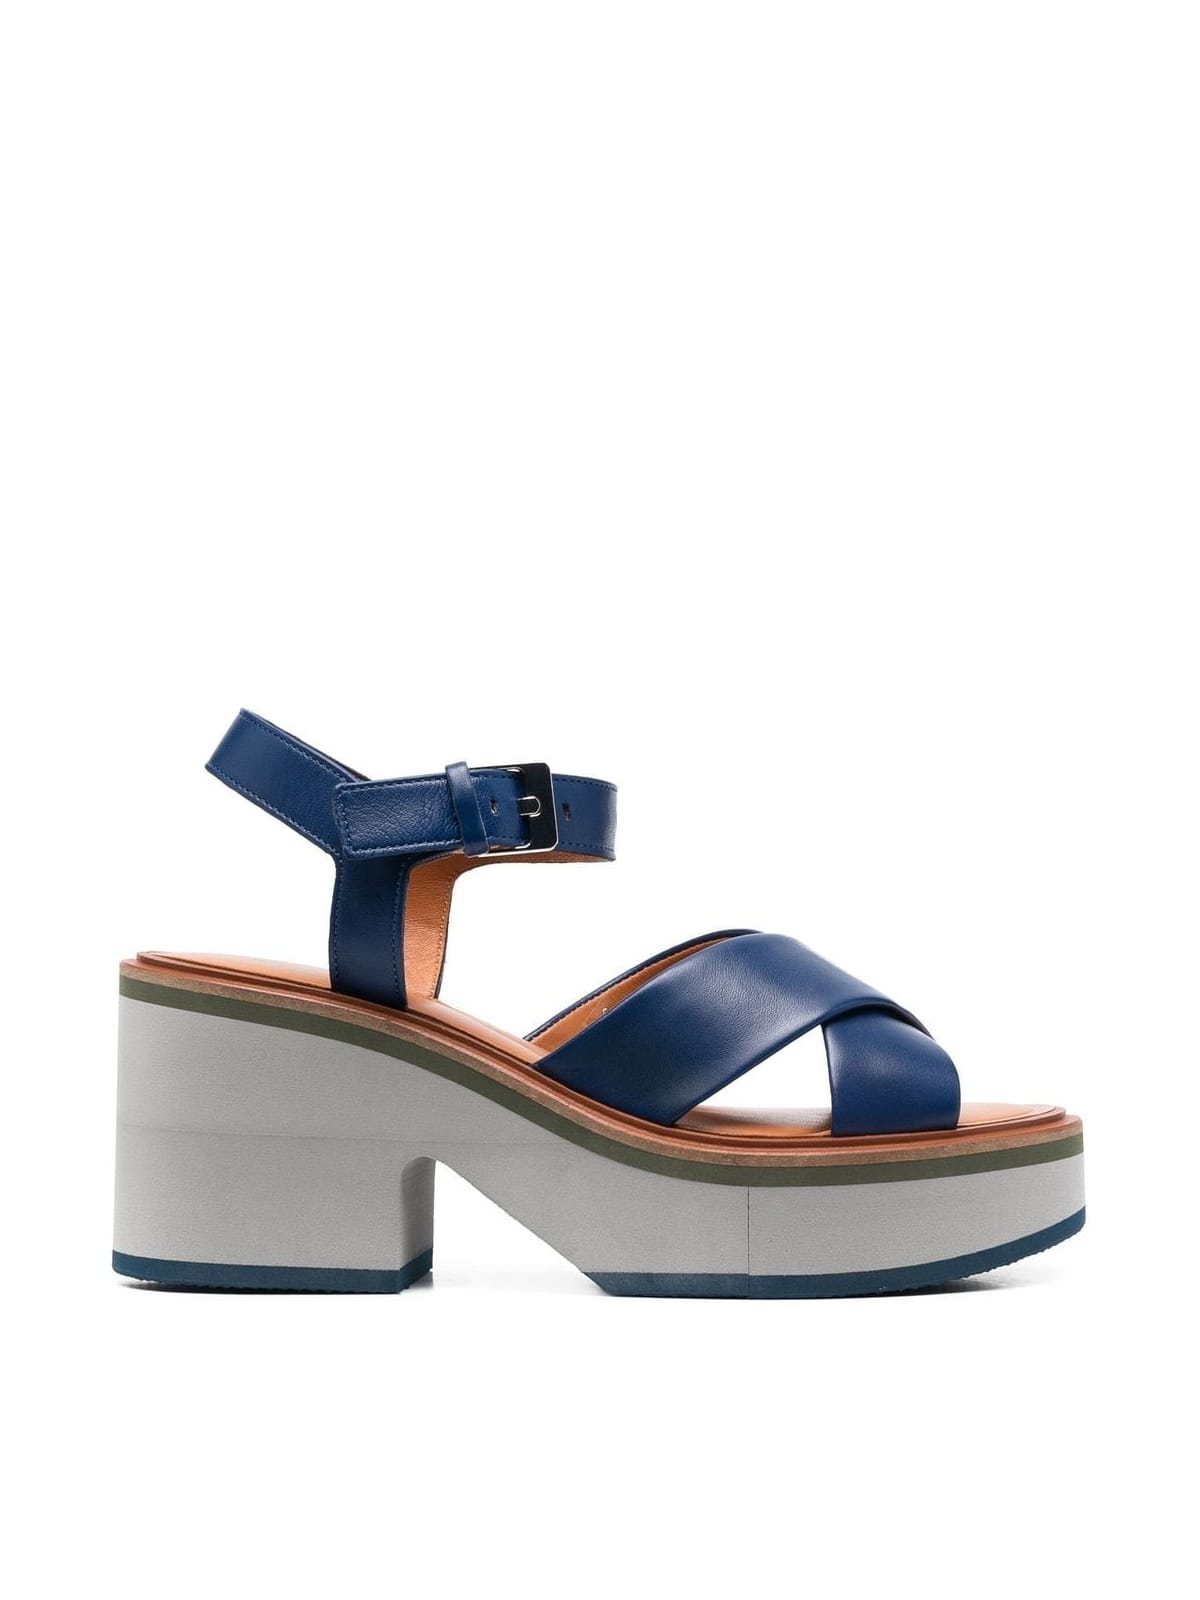 Charline9 Criss Cross Sandal With Closure At The Ankles